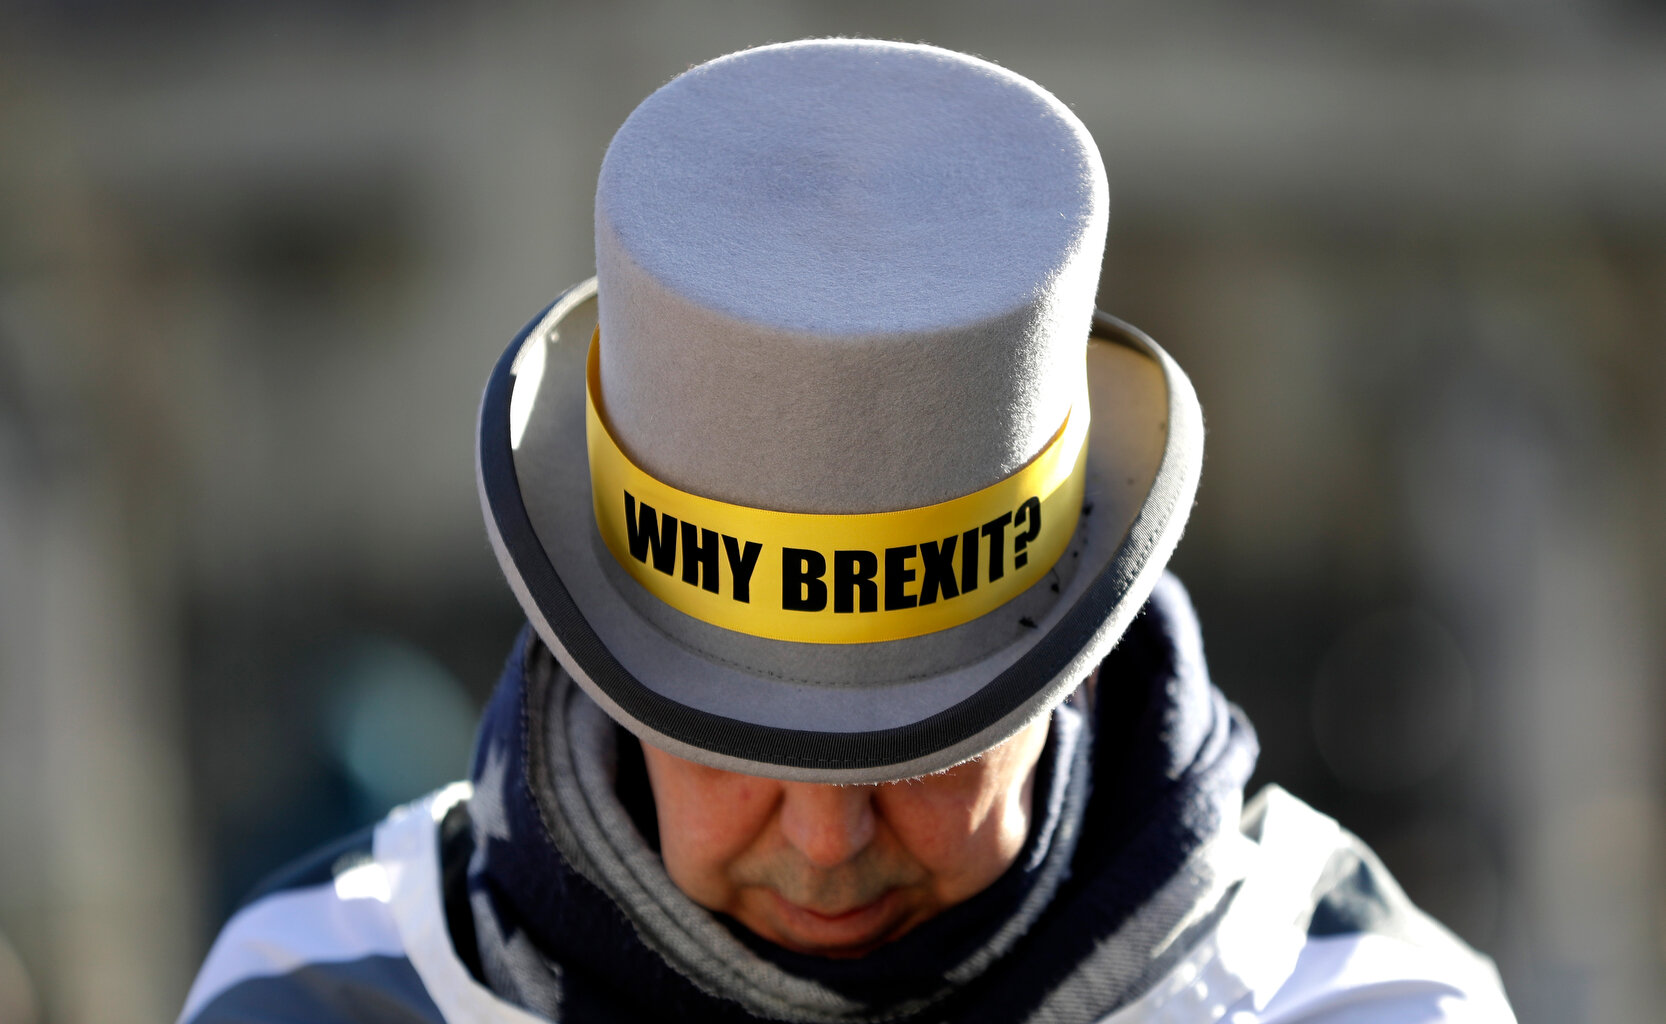  Why Brexit? written on the hat of Anti-Brexit campaigner Steve Bray as he stands outside Parliament in London, Wednesday, Jan. 29, 2020. (AP Photo/Kirsty Wigglesworth) 